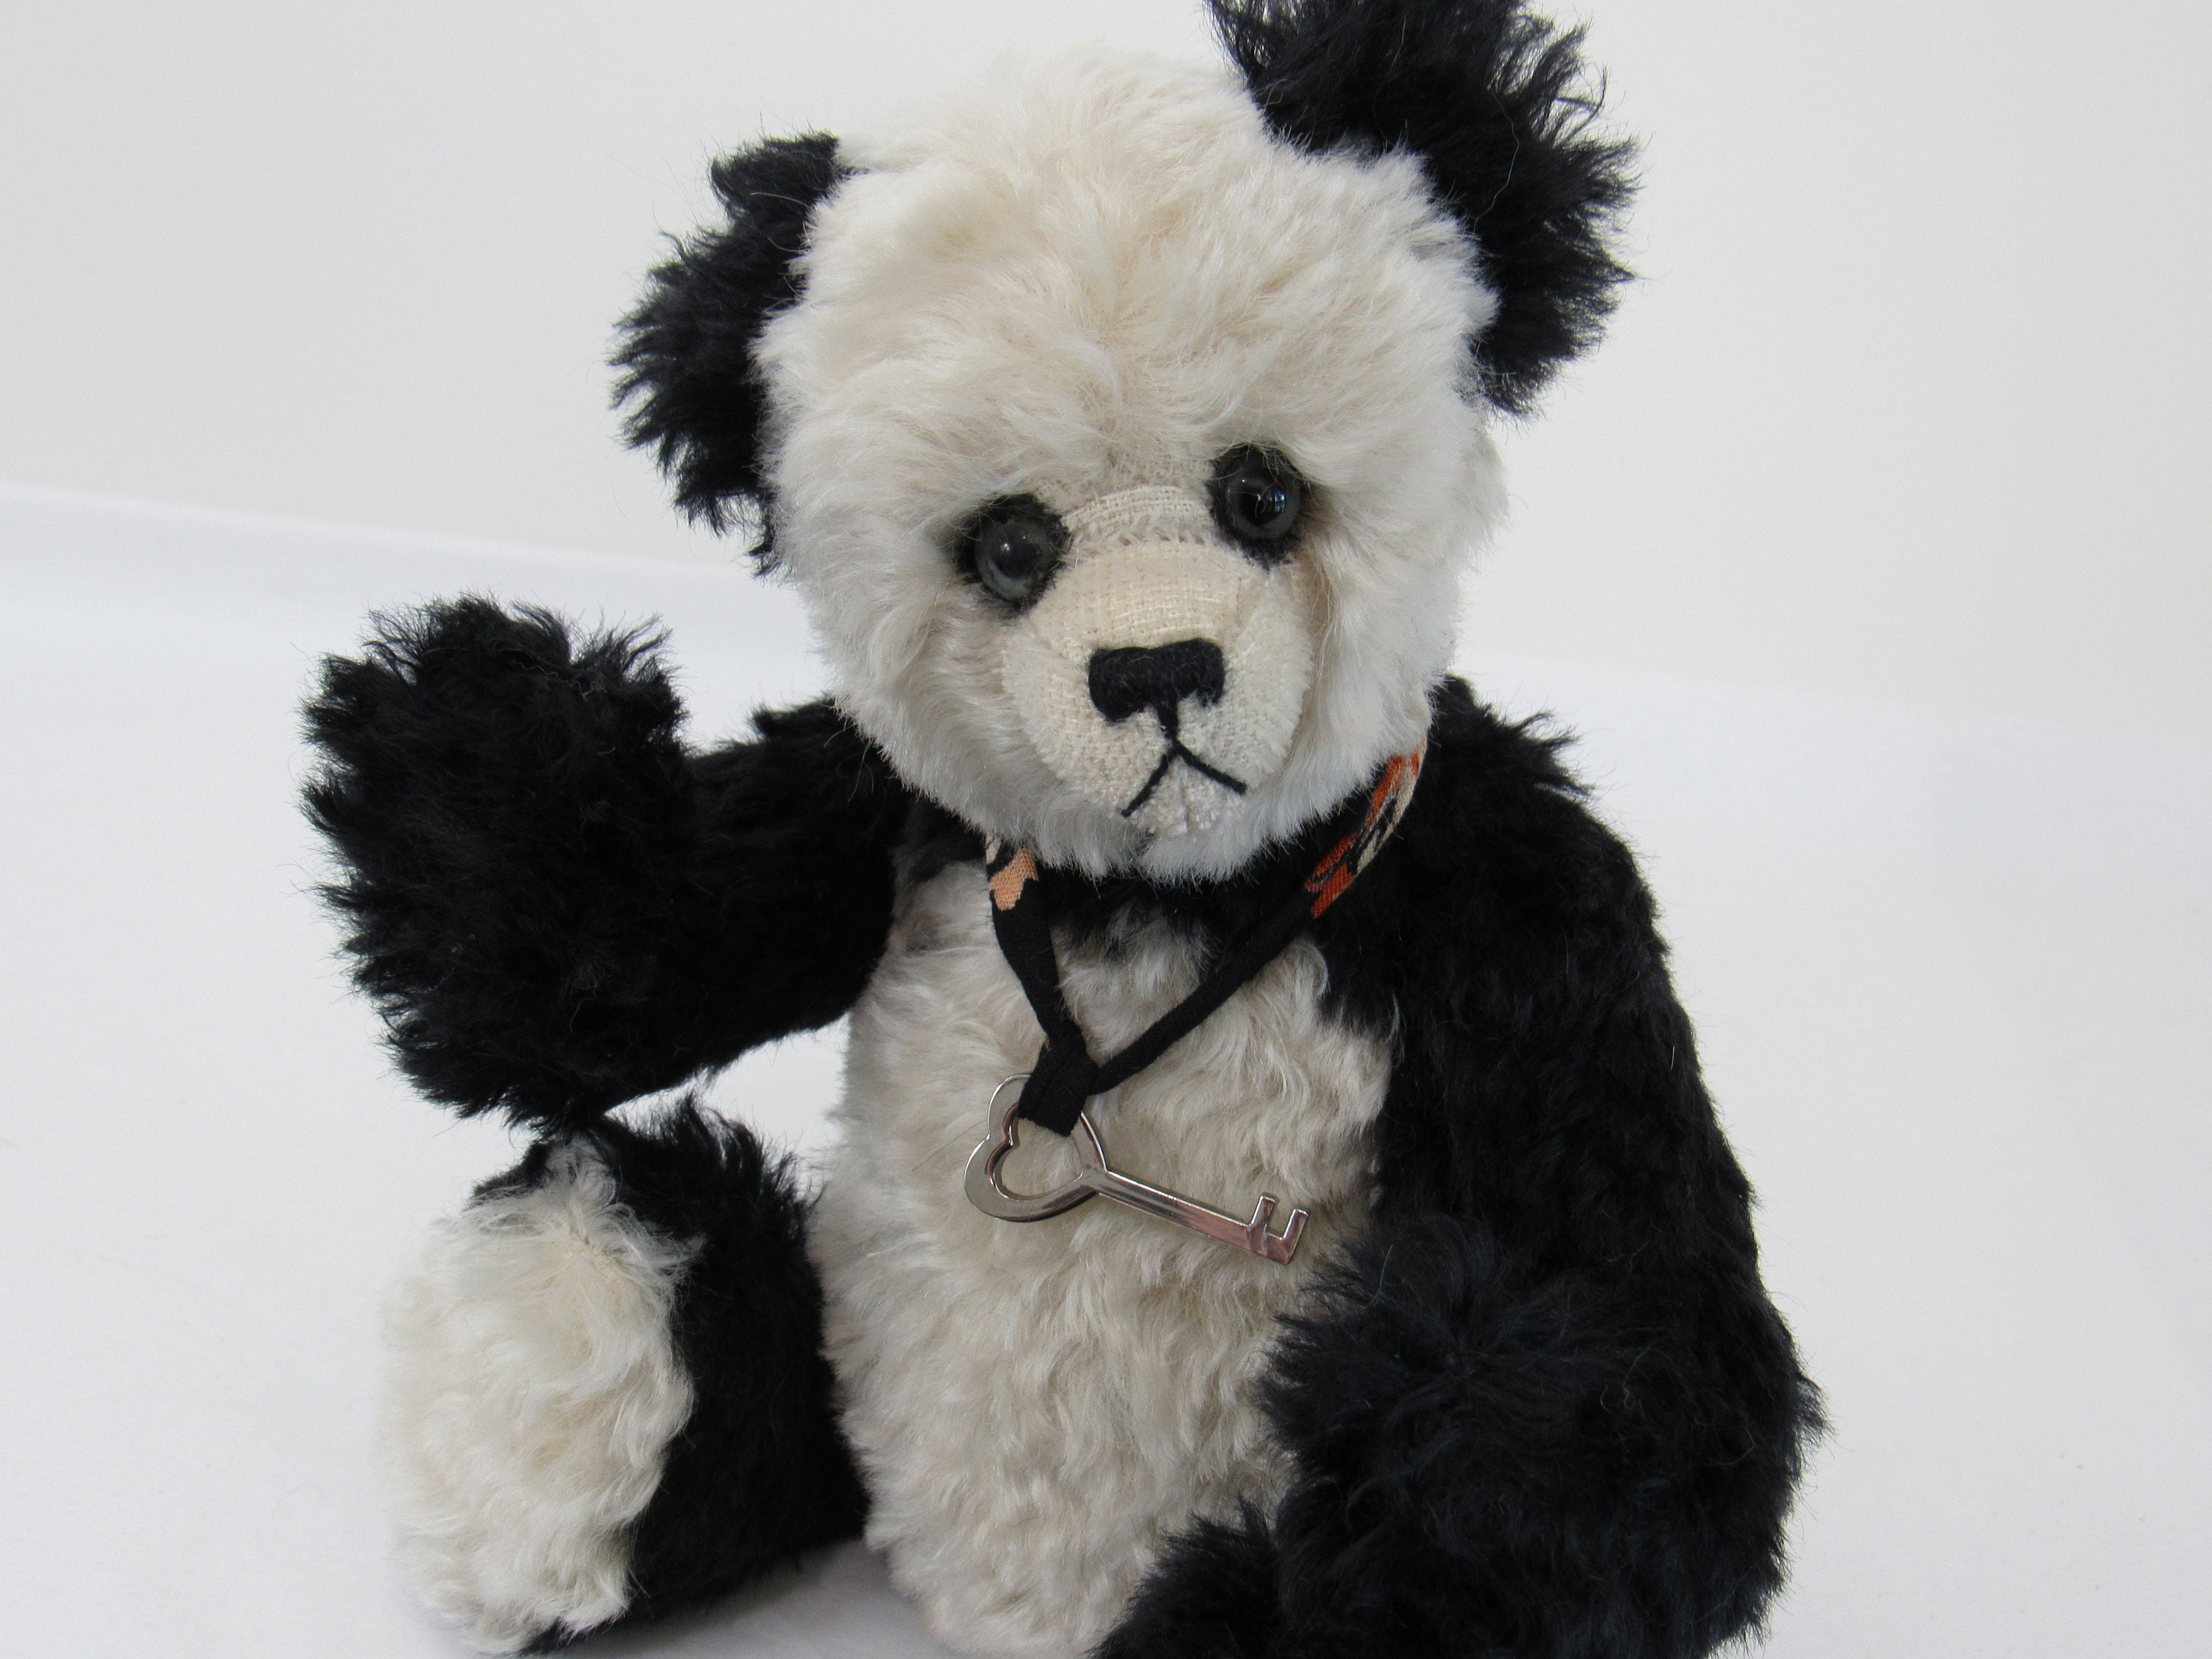 Soft Weighted Stuffed Animals 5lbs – 20 inches - Plush Weighted Stuffed  Panda